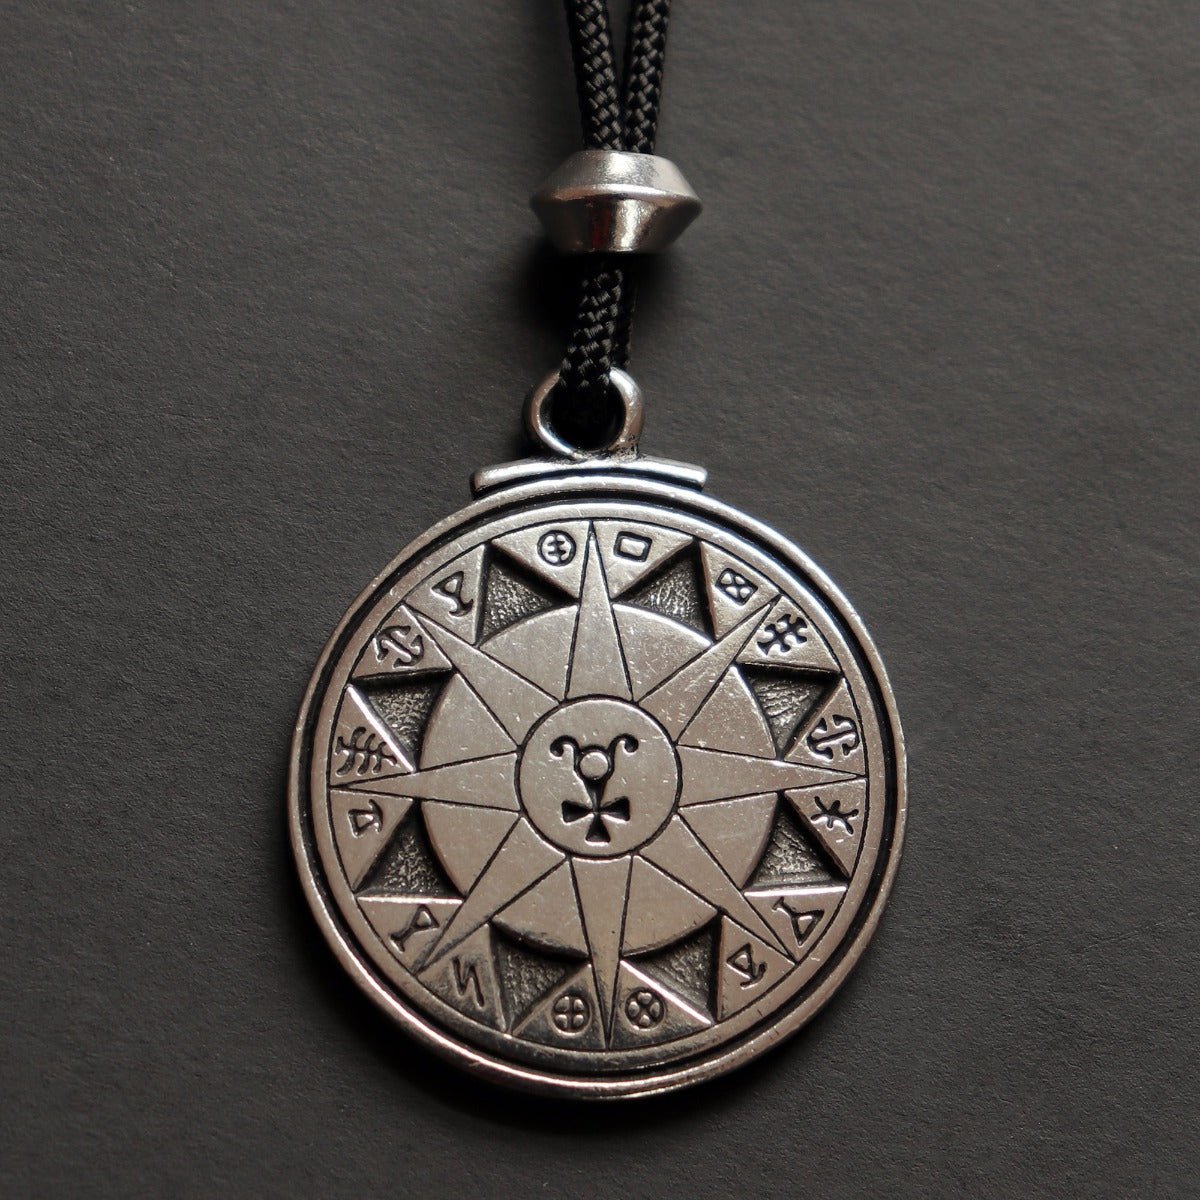 Safety In Travel Talisman - 13 Moons